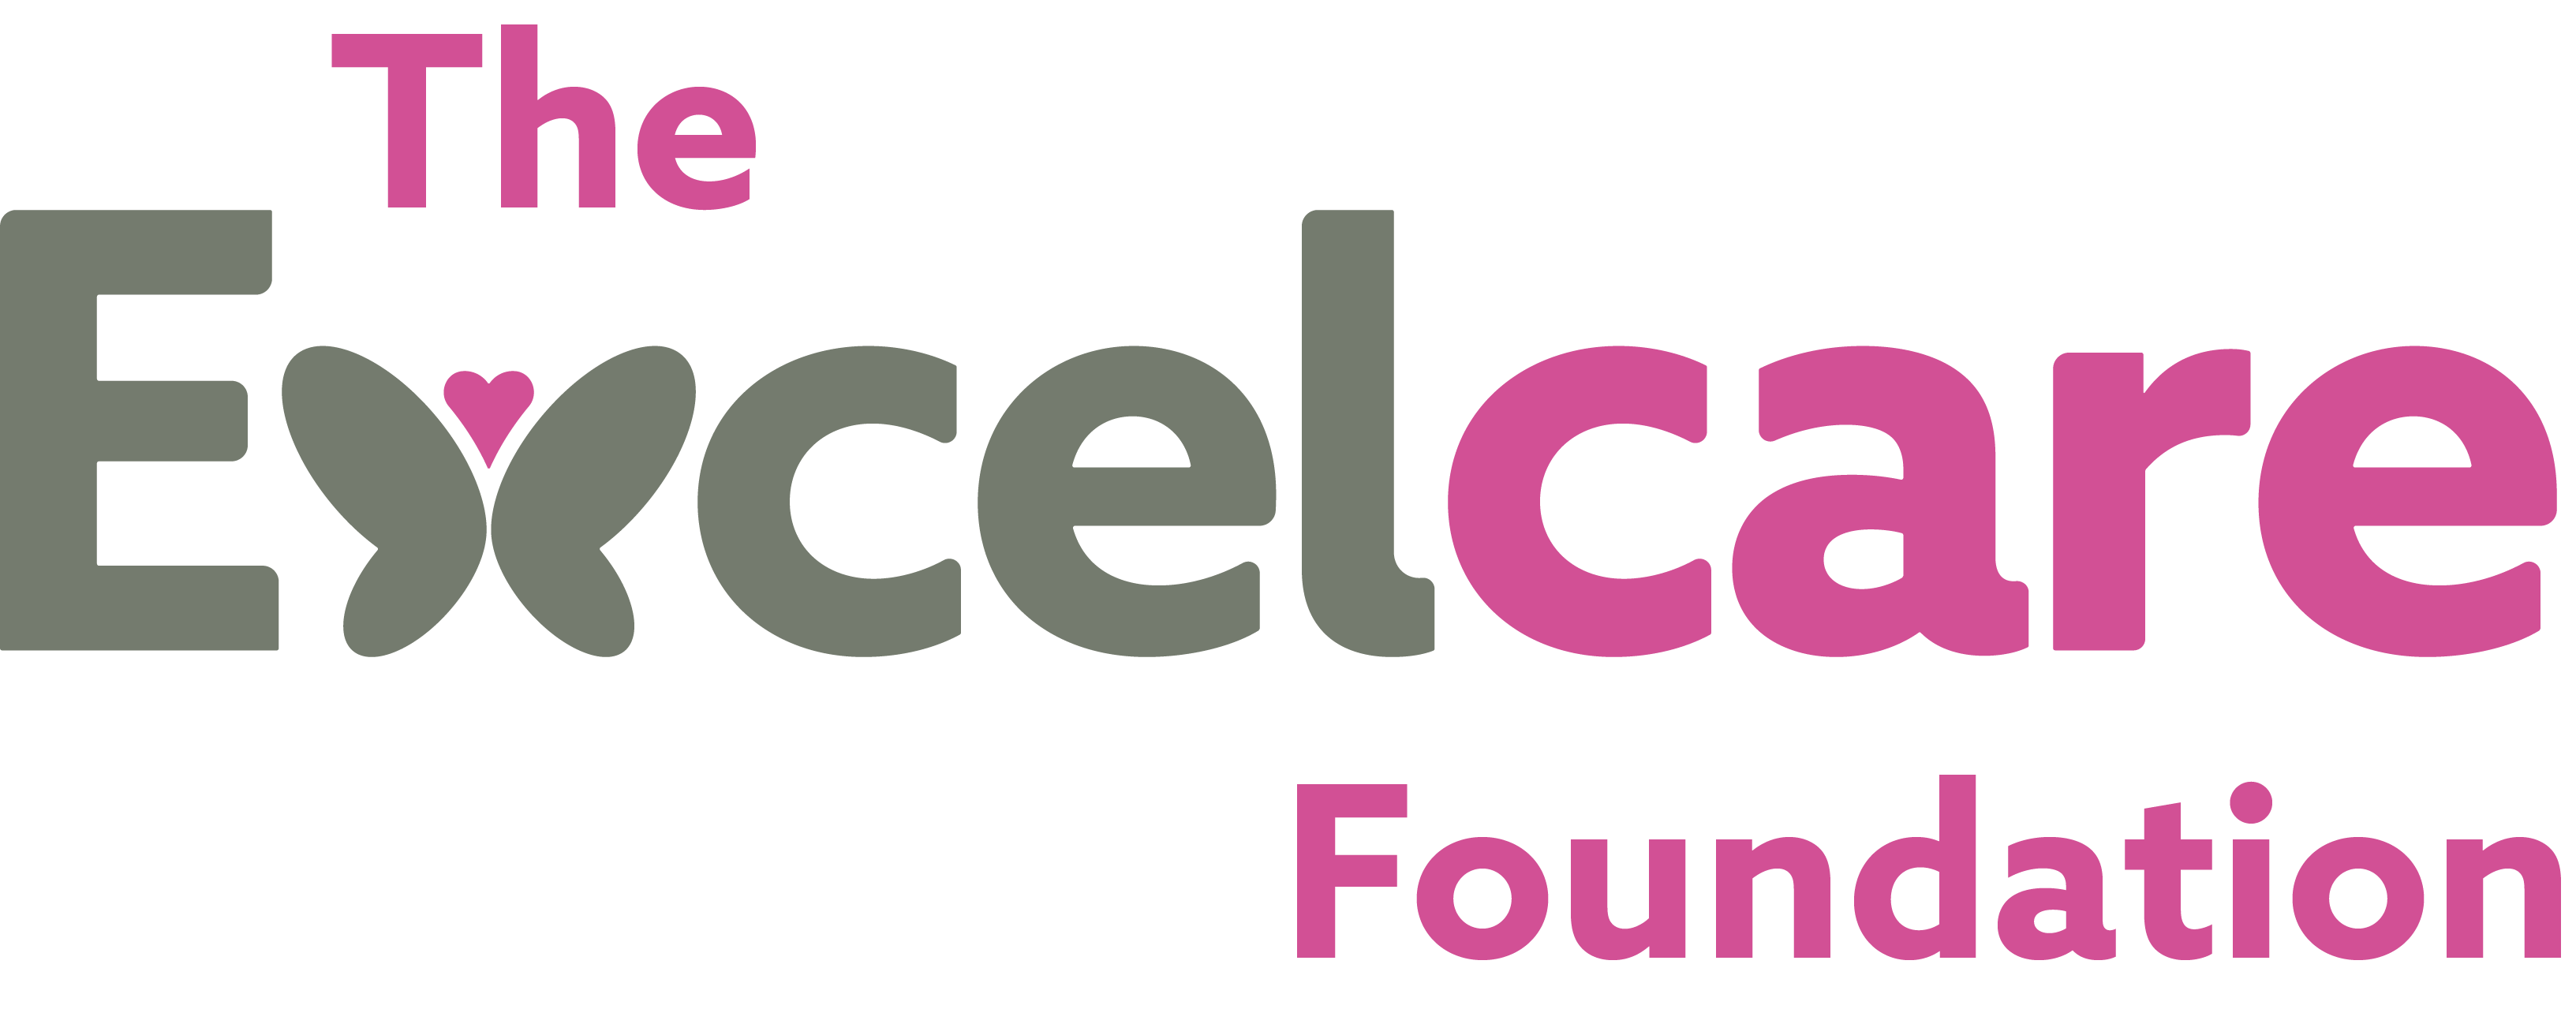 Excelcare logo 2022_CMYK_Foundation.png